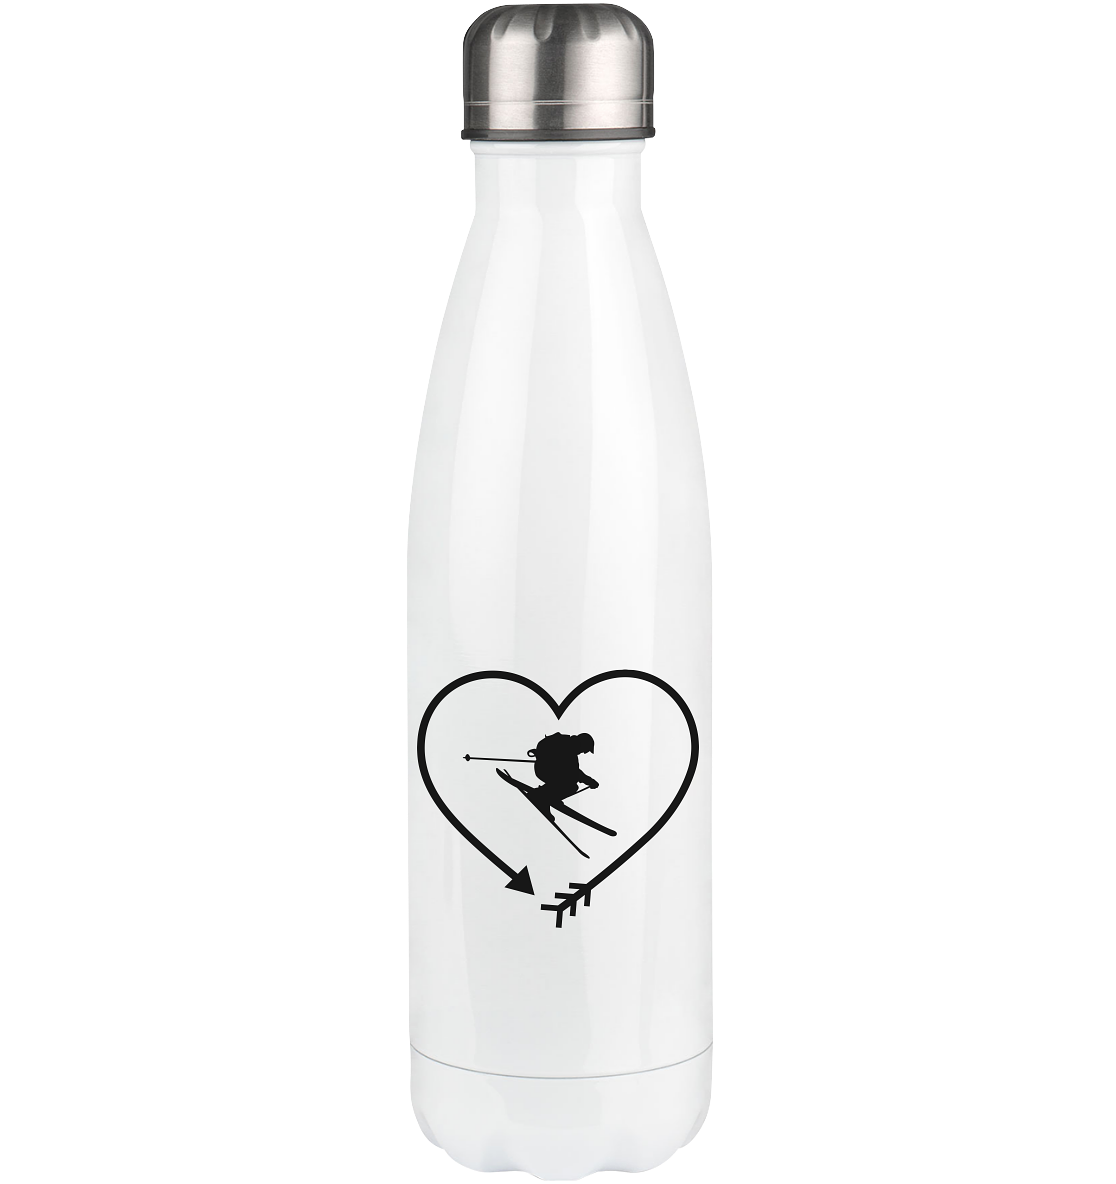 Arrow in Heartshape and Skiing - Edelstahl Thermosflasche klettern ski 500ml